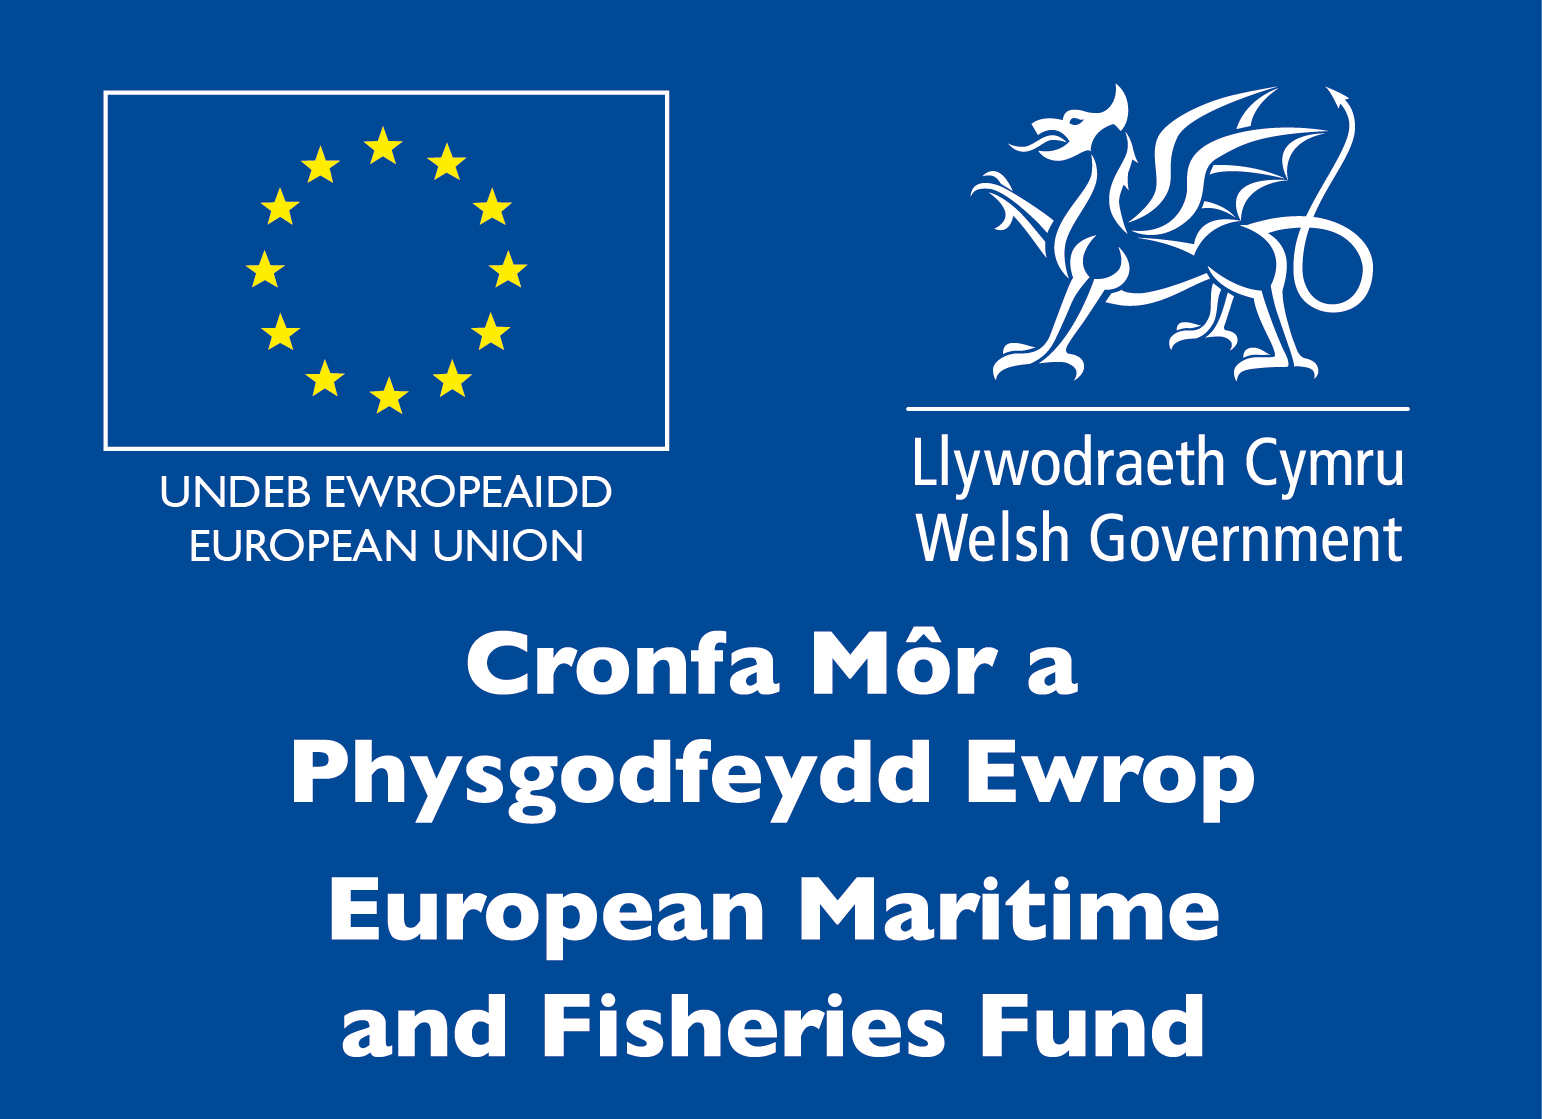 Welsh Fisheries